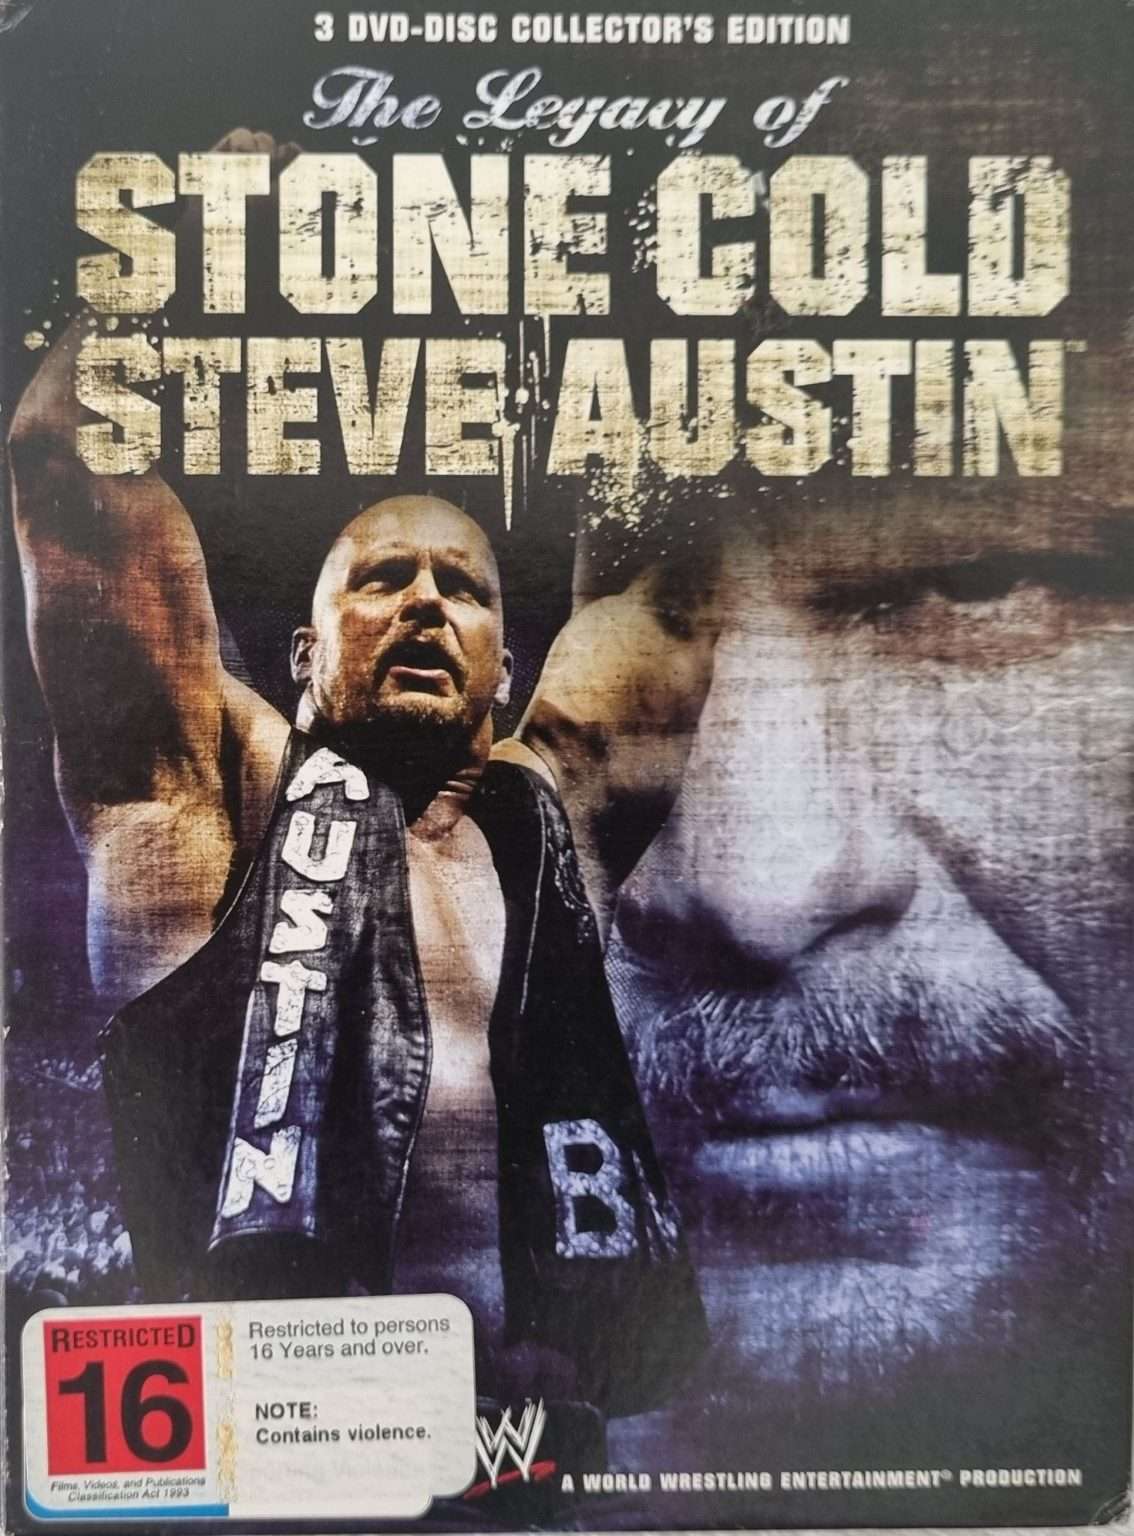 WWE: The Legacy of Stone Cold Steve Austin 3 Disc Collector's Edition